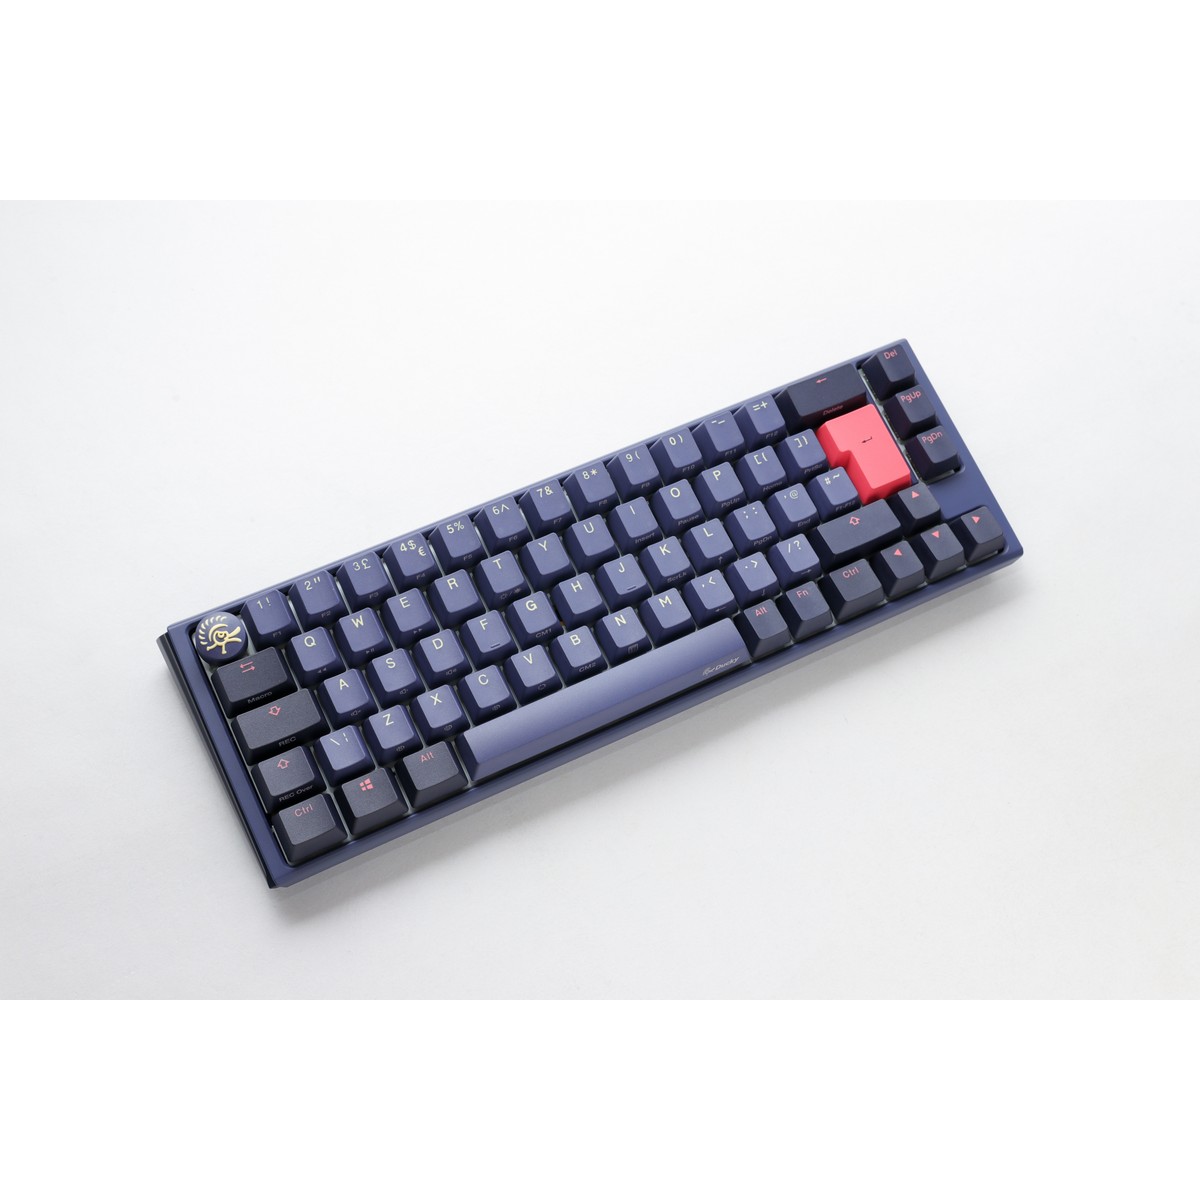 Ducky - Ducky One 3 Cosmic SF 65% USB RGB Mechanical Gaming Keyboard Cherry MX Brown Switch - UK Layout